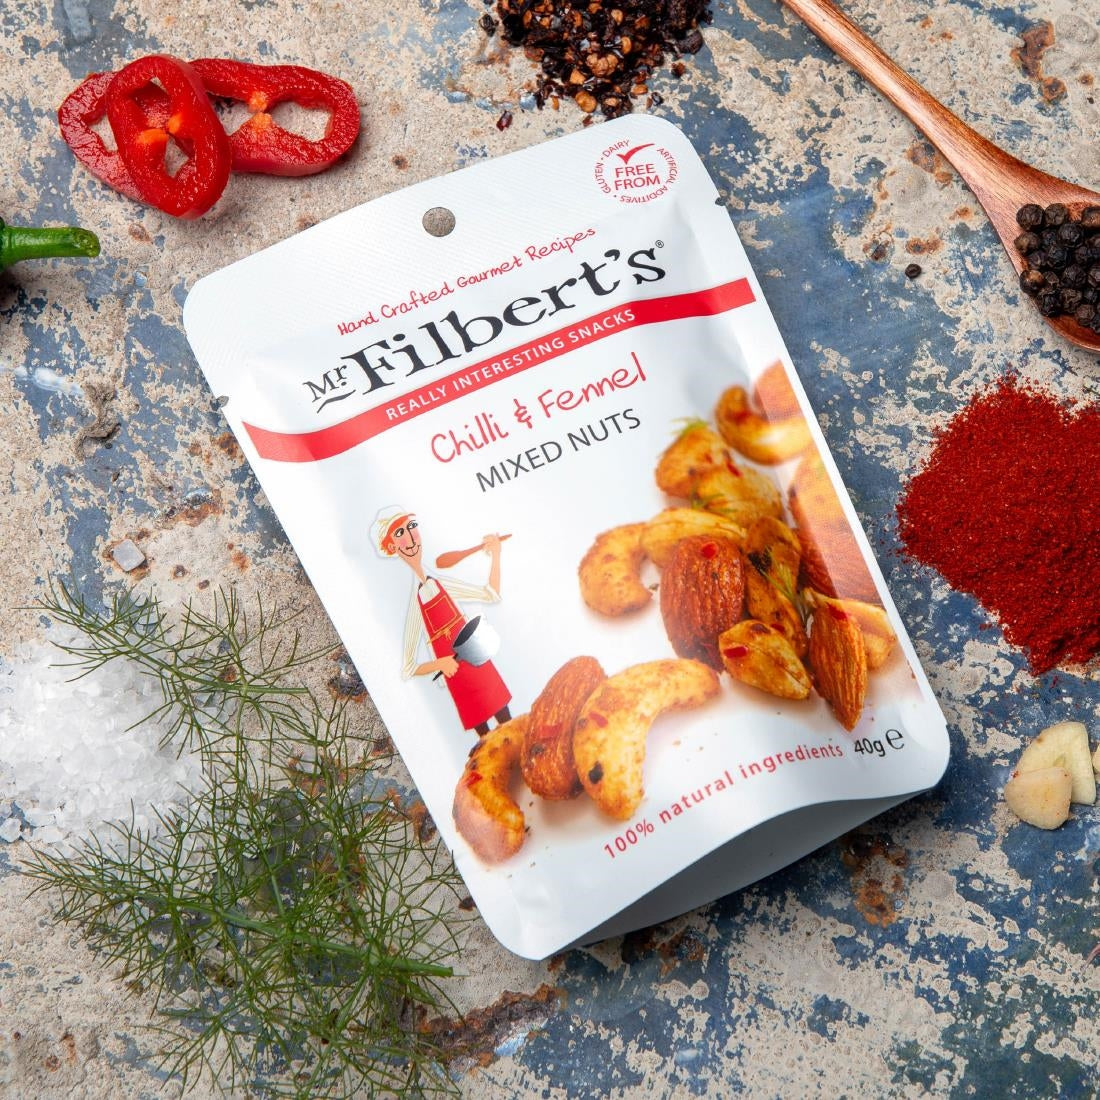 FU480 Mr Filbert's Chilli & Fennel Mixed Nuts 40g (Pack of 20)